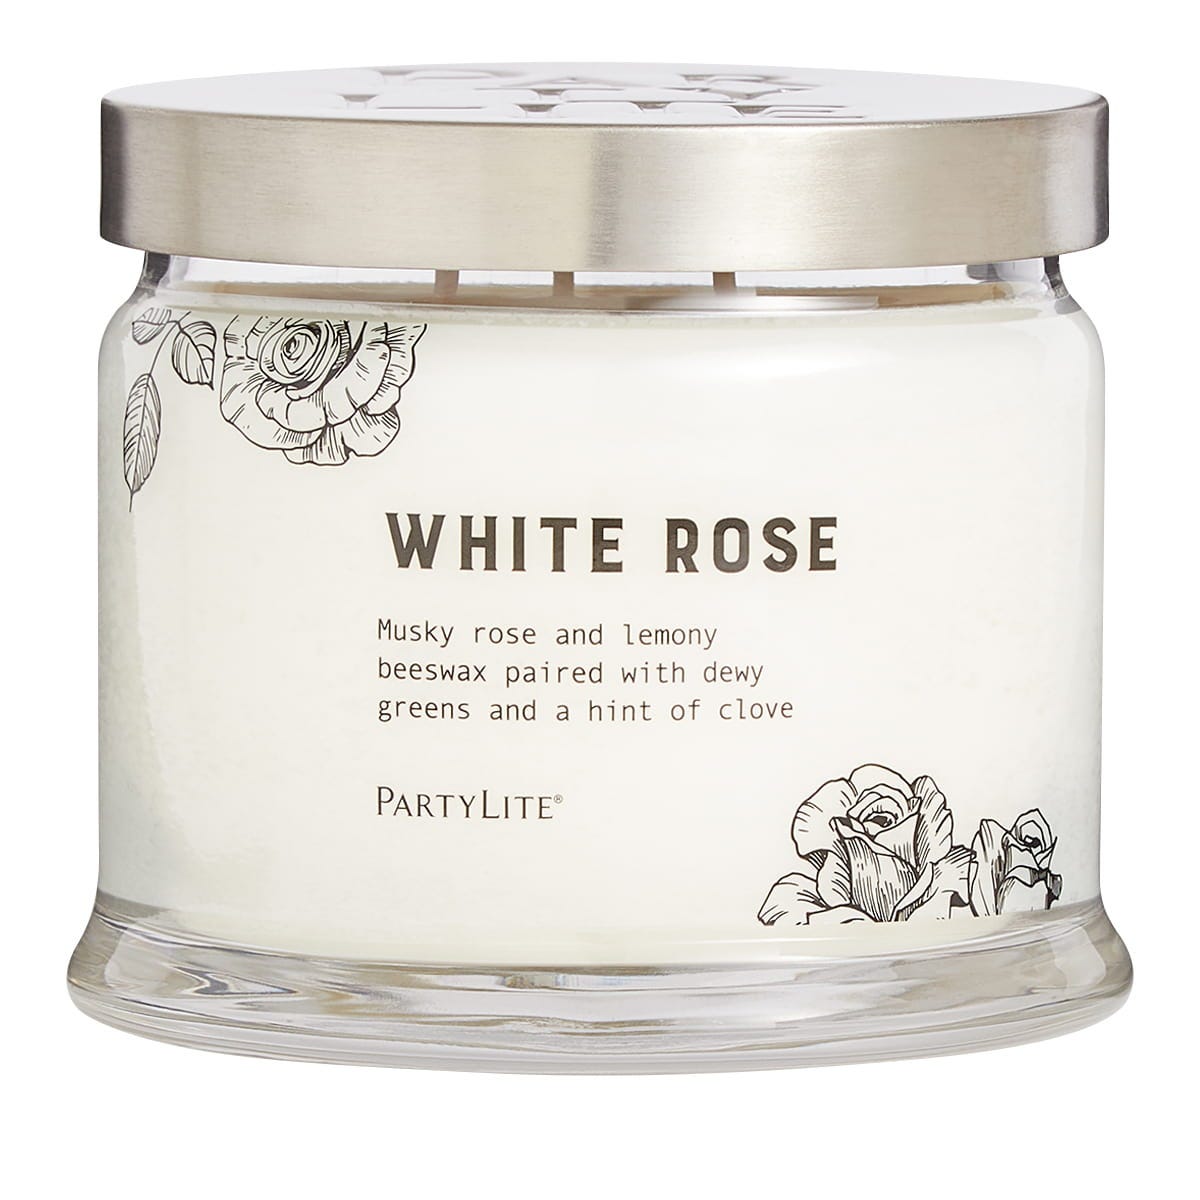 White Rose 3-Wick Jar Candle